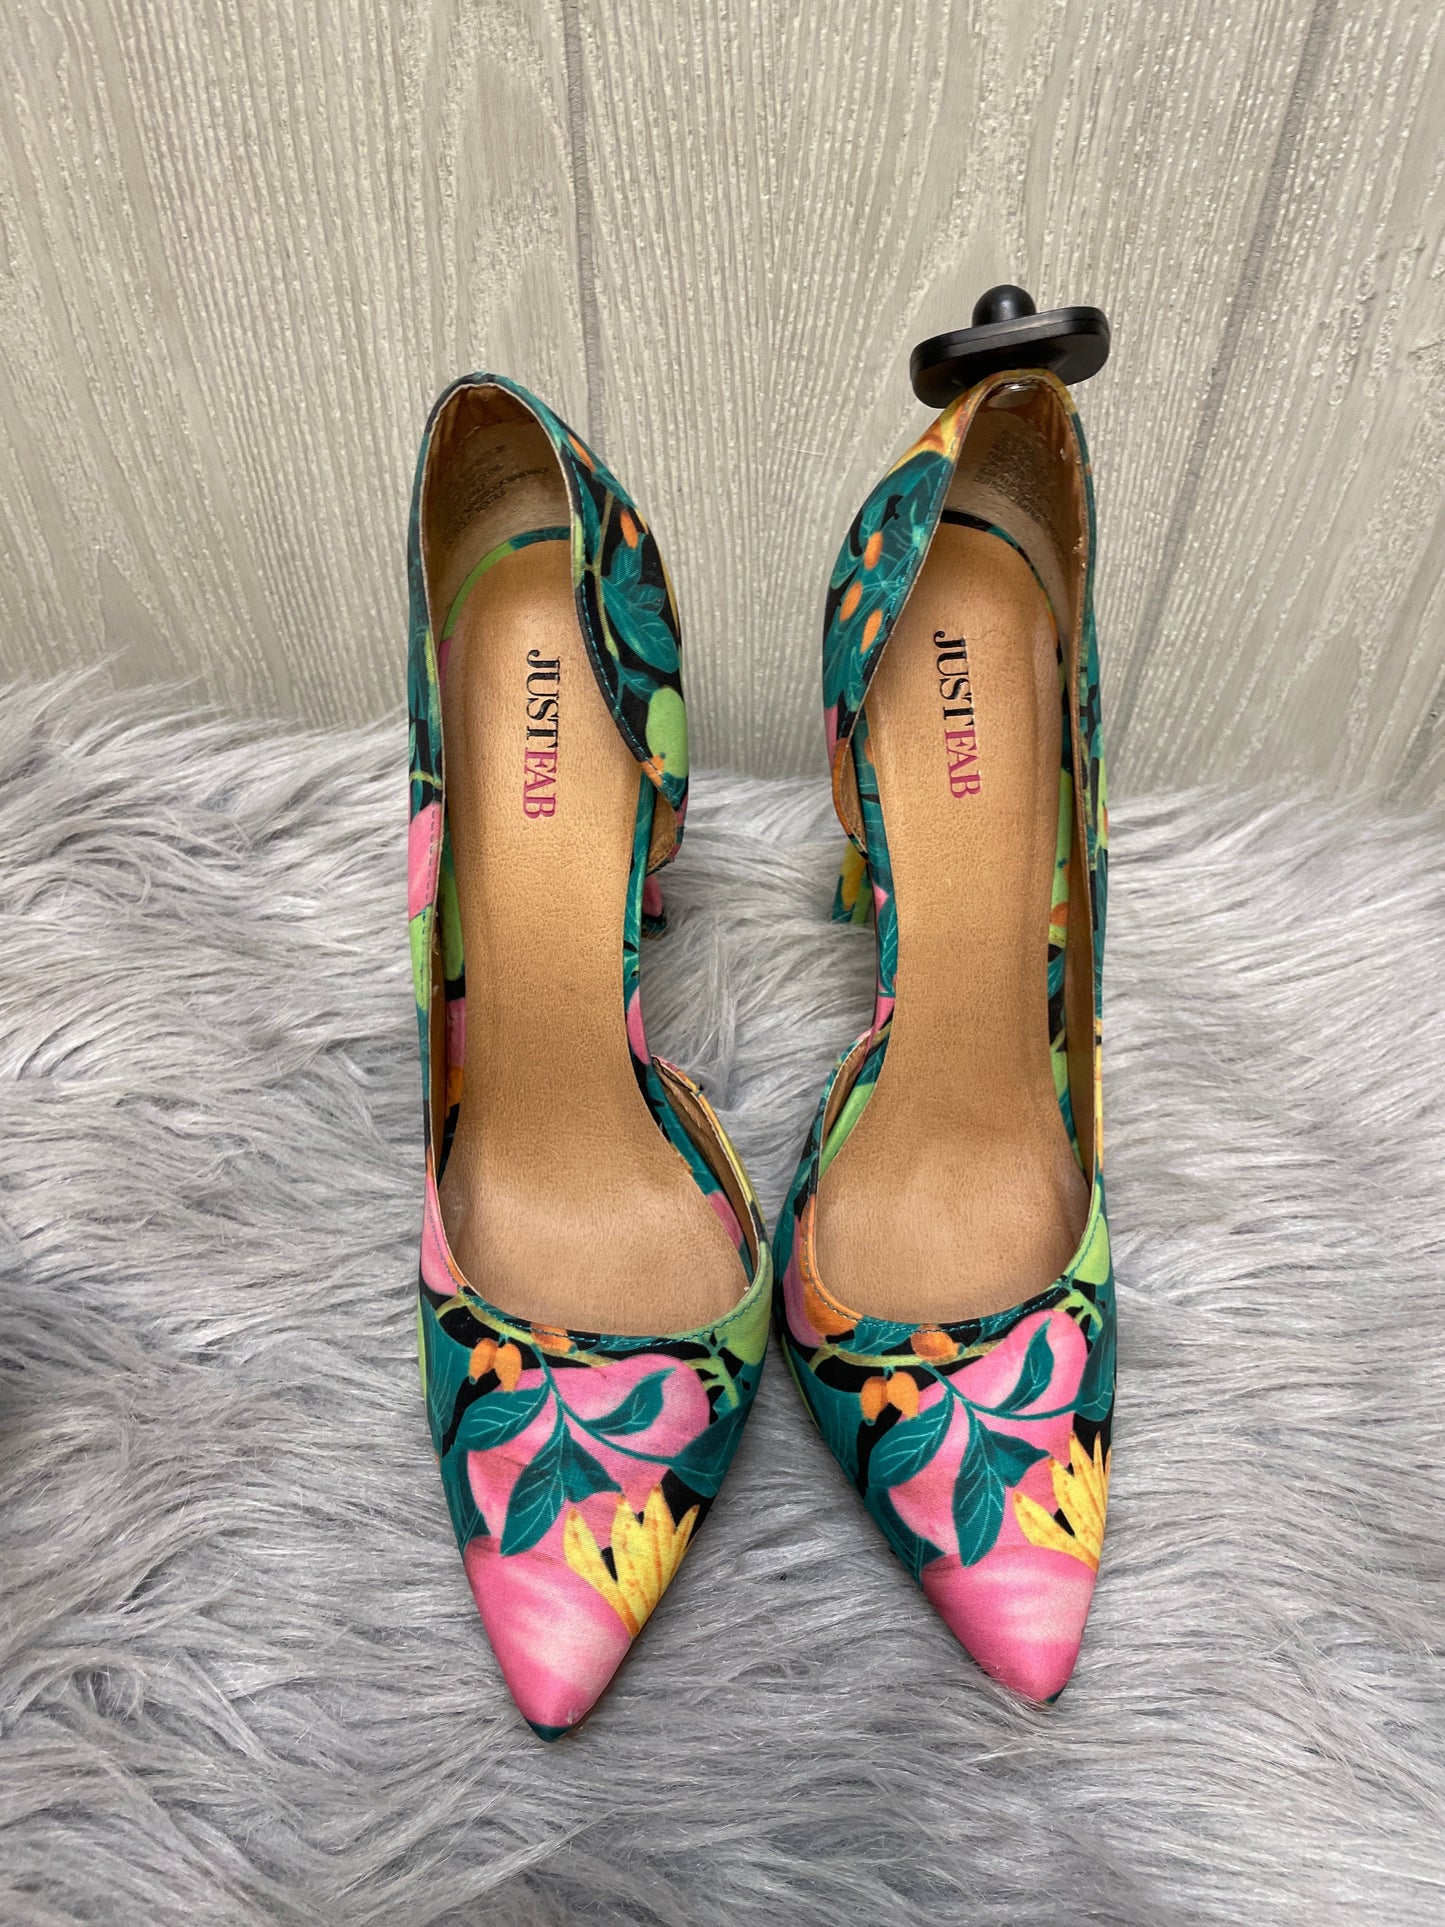 Tropical Print Shoes Heels Stiletto Just Fab, Size 8.5